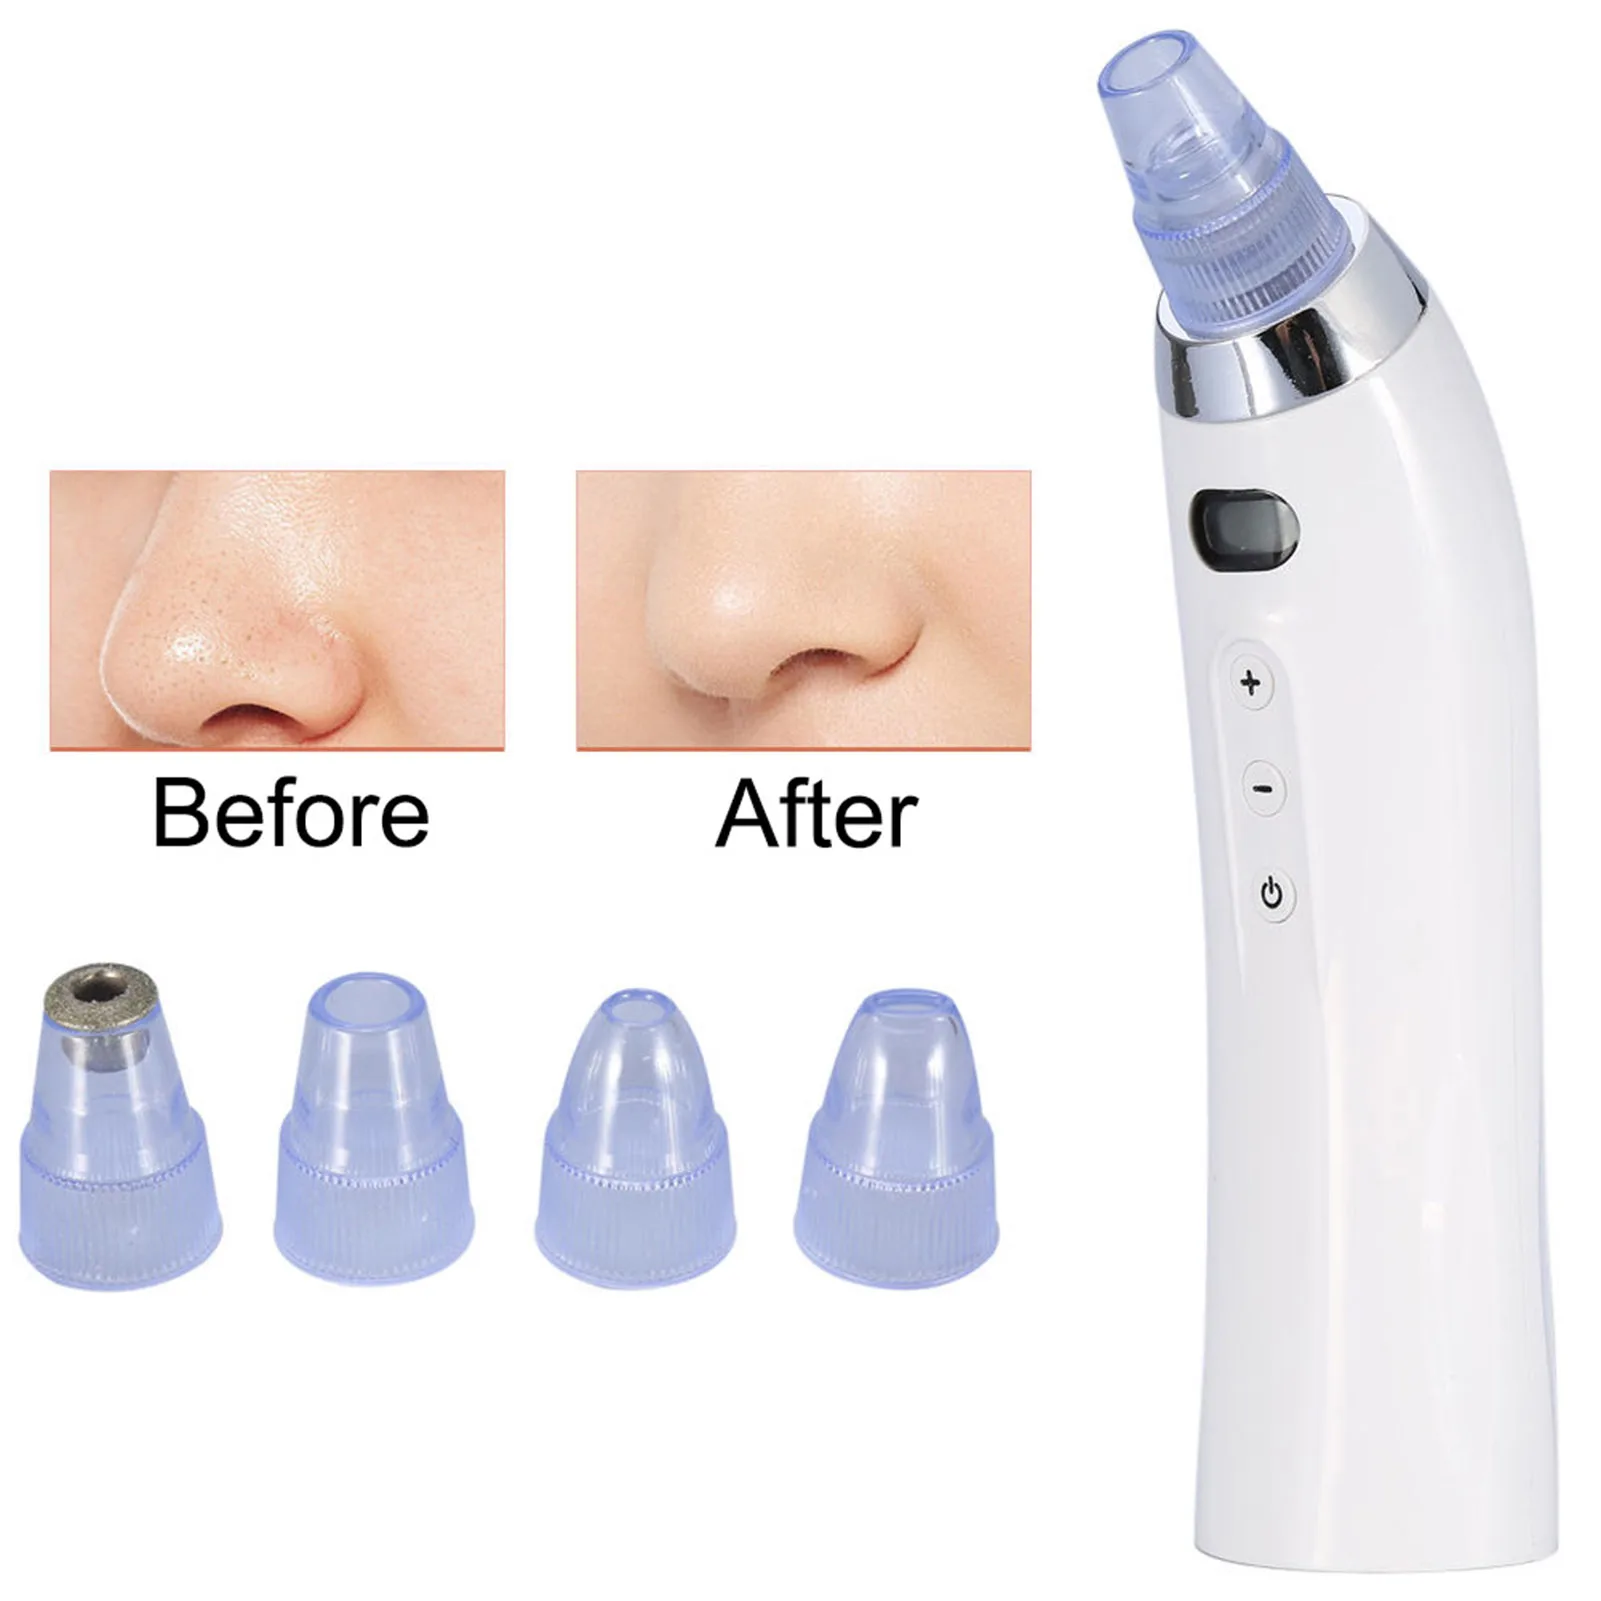 

New Blackhead Remover Vacuum Cleaner Electric Acne Comedone Whitehead Extractor Tools for Massaging Deep Pore Cleansing